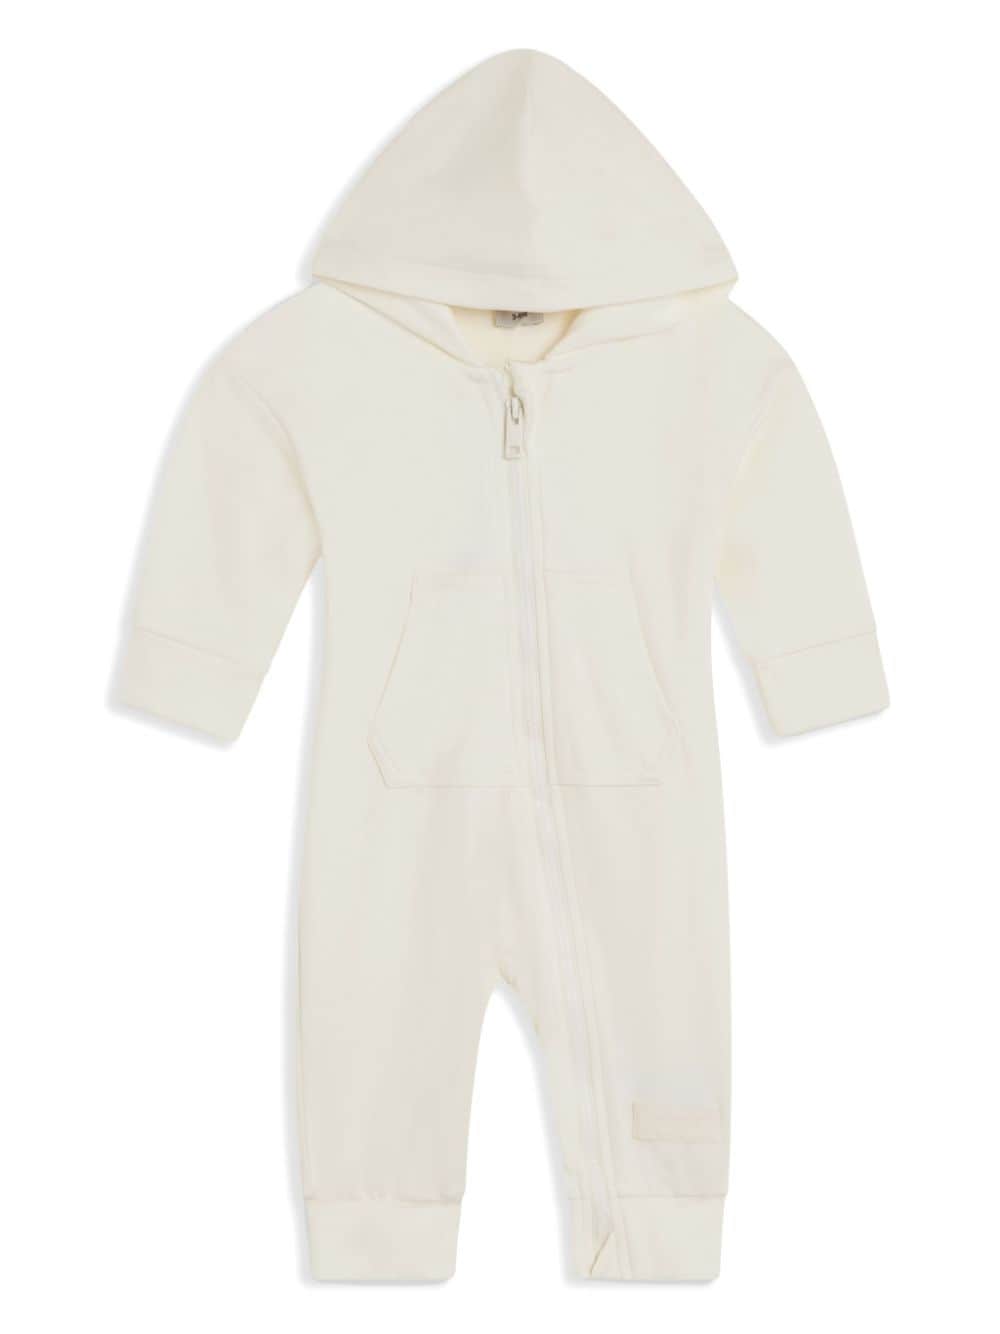 THE GIVING MOVEMENT long-sleeve onesie - Neutrals von THE GIVING MOVEMENT